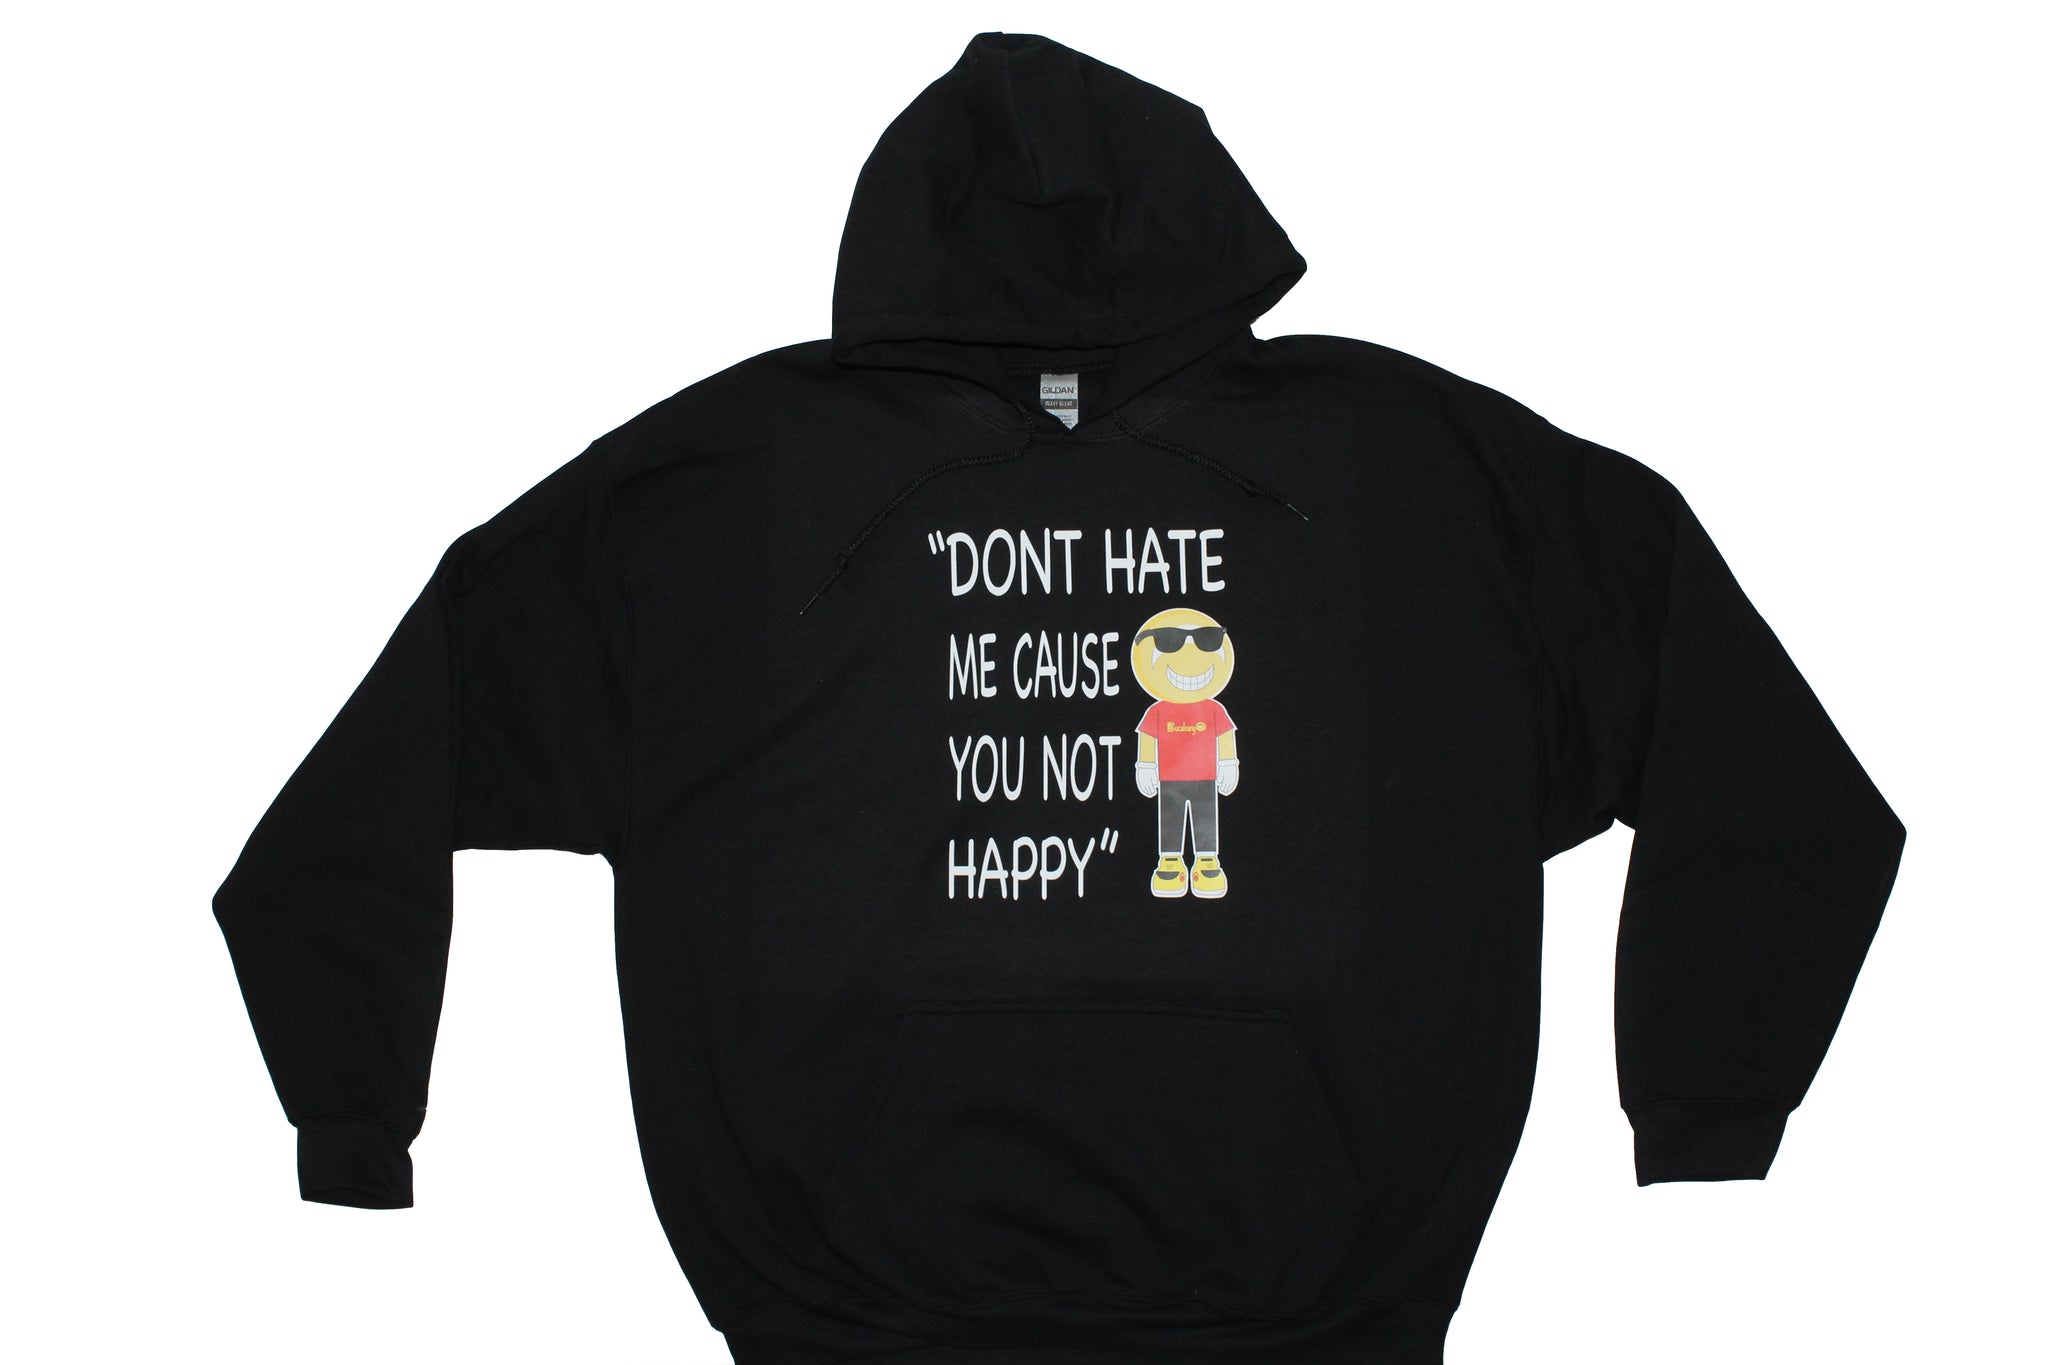 NEW Bucaleany "DON'T HATE ME CAUSE YOU NOT HAPPY" hoodie